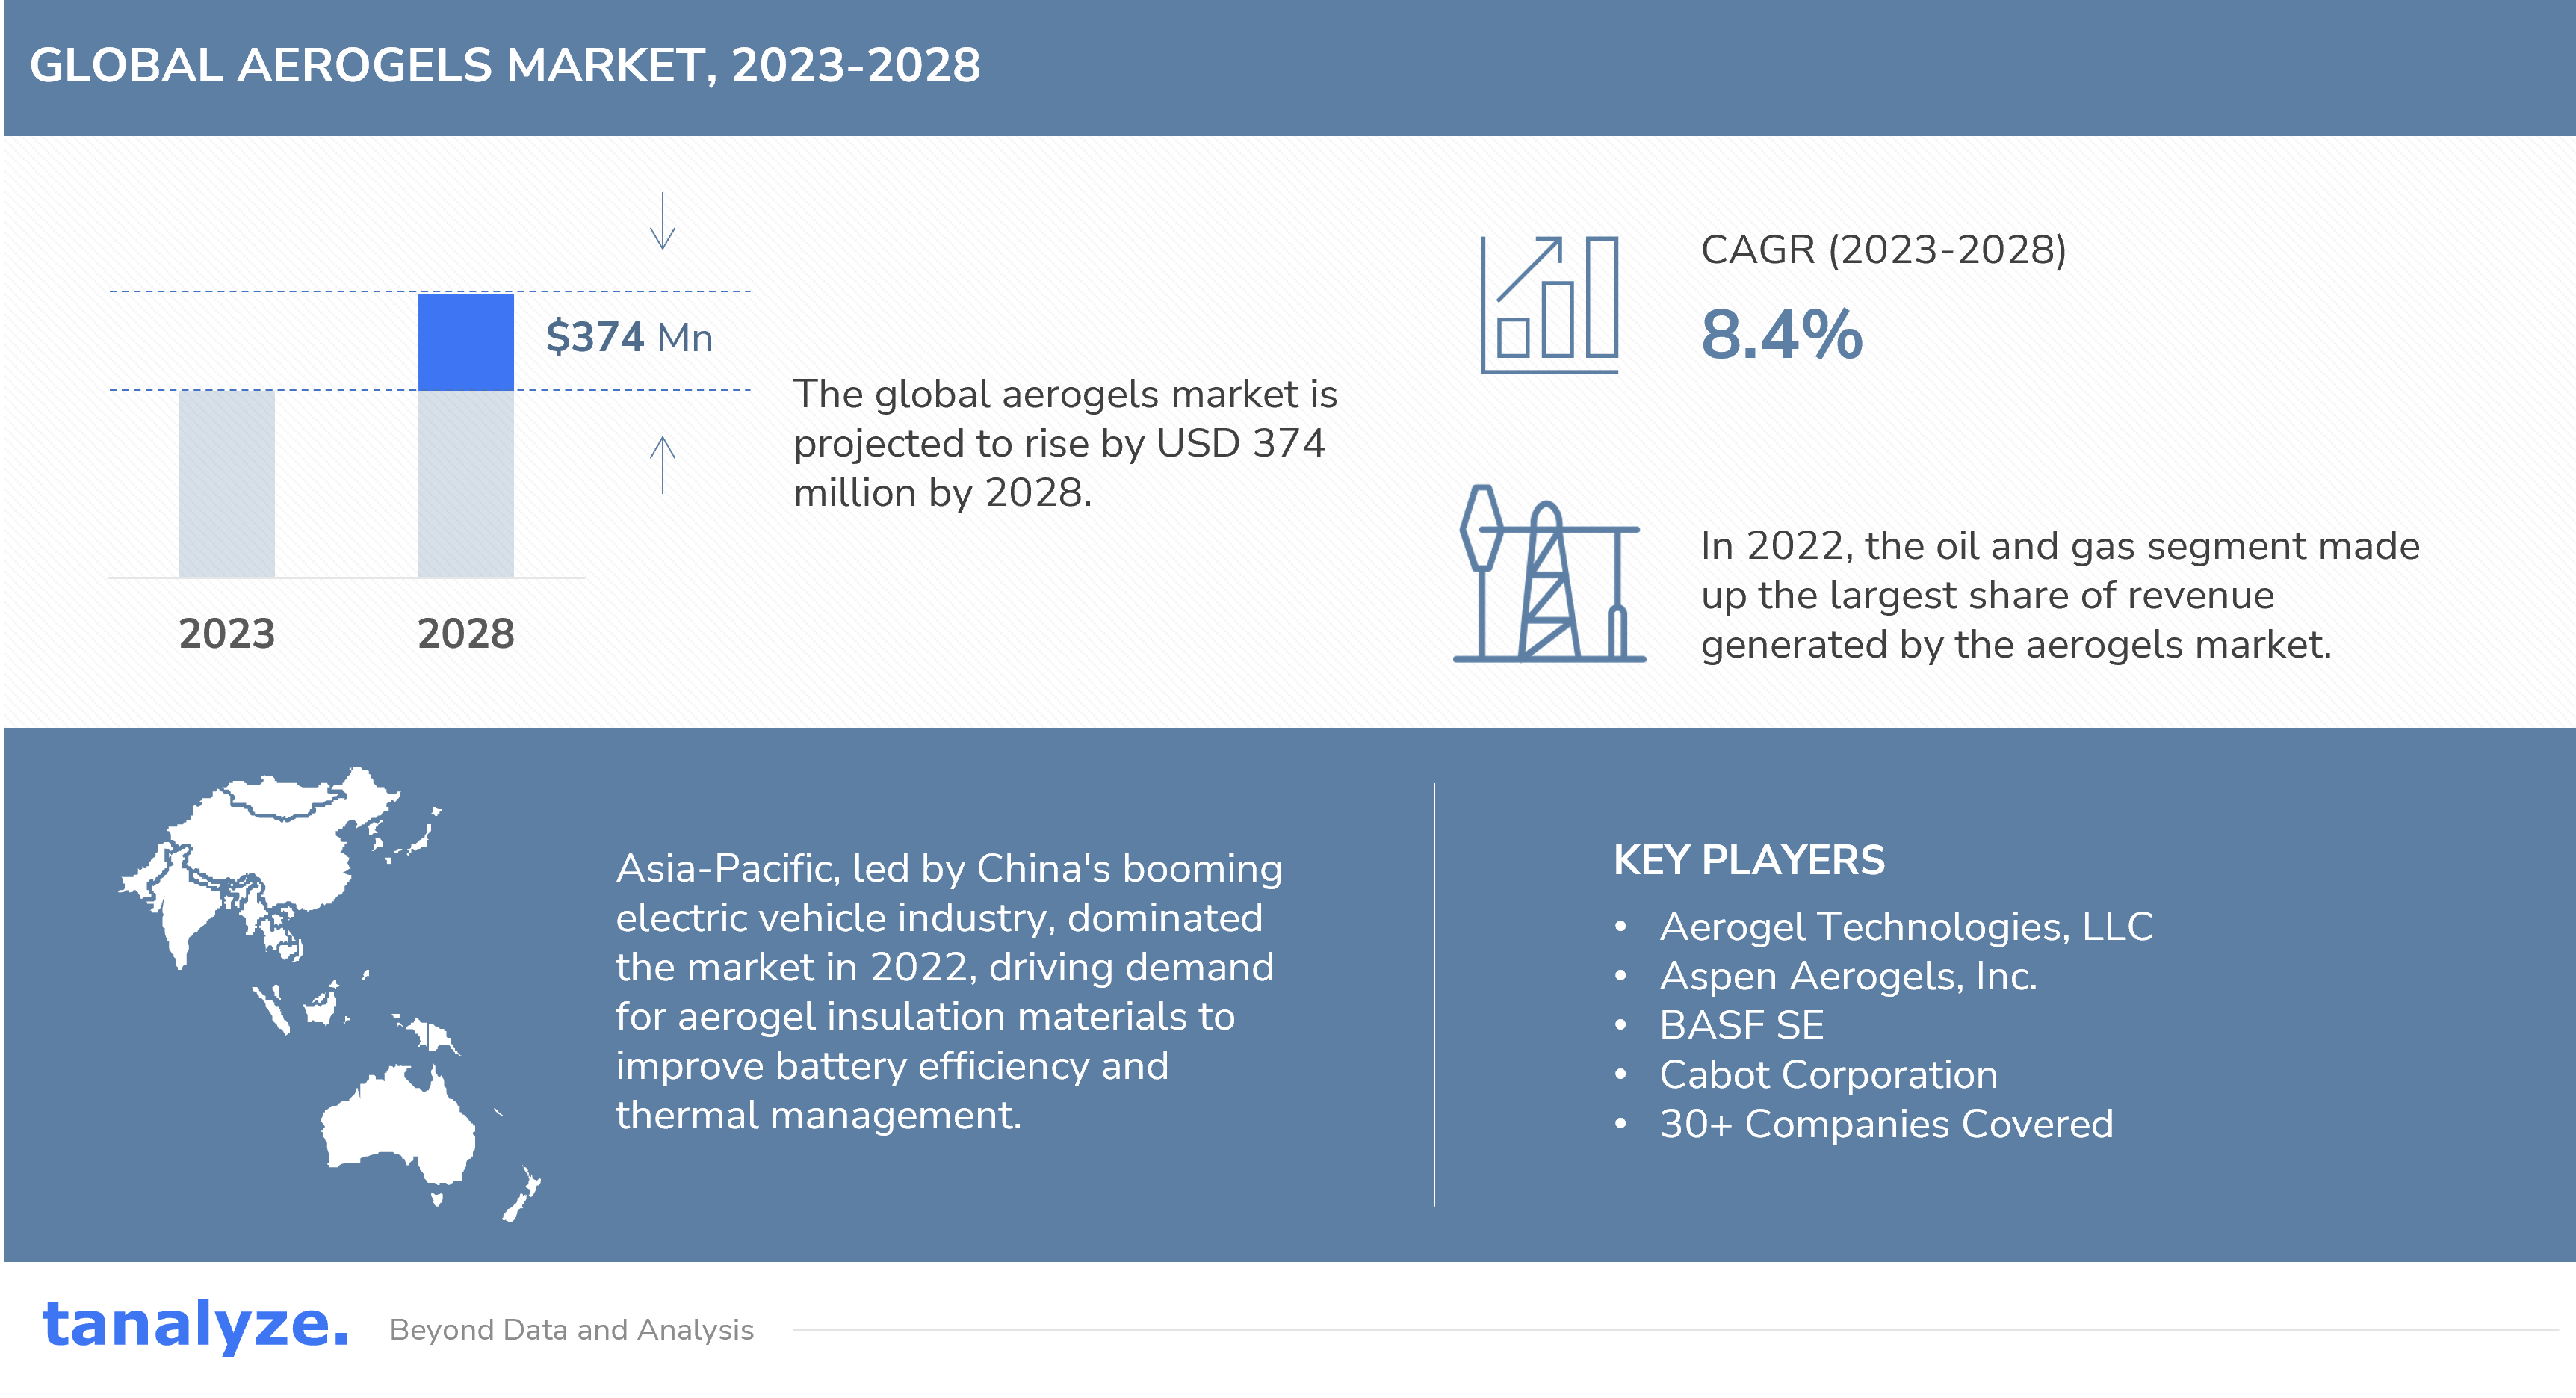 Aerogels Market to Reach USD 1,125.4 Million at a CAGR of 8.4% from 2023 to 2028 - Tanalyze